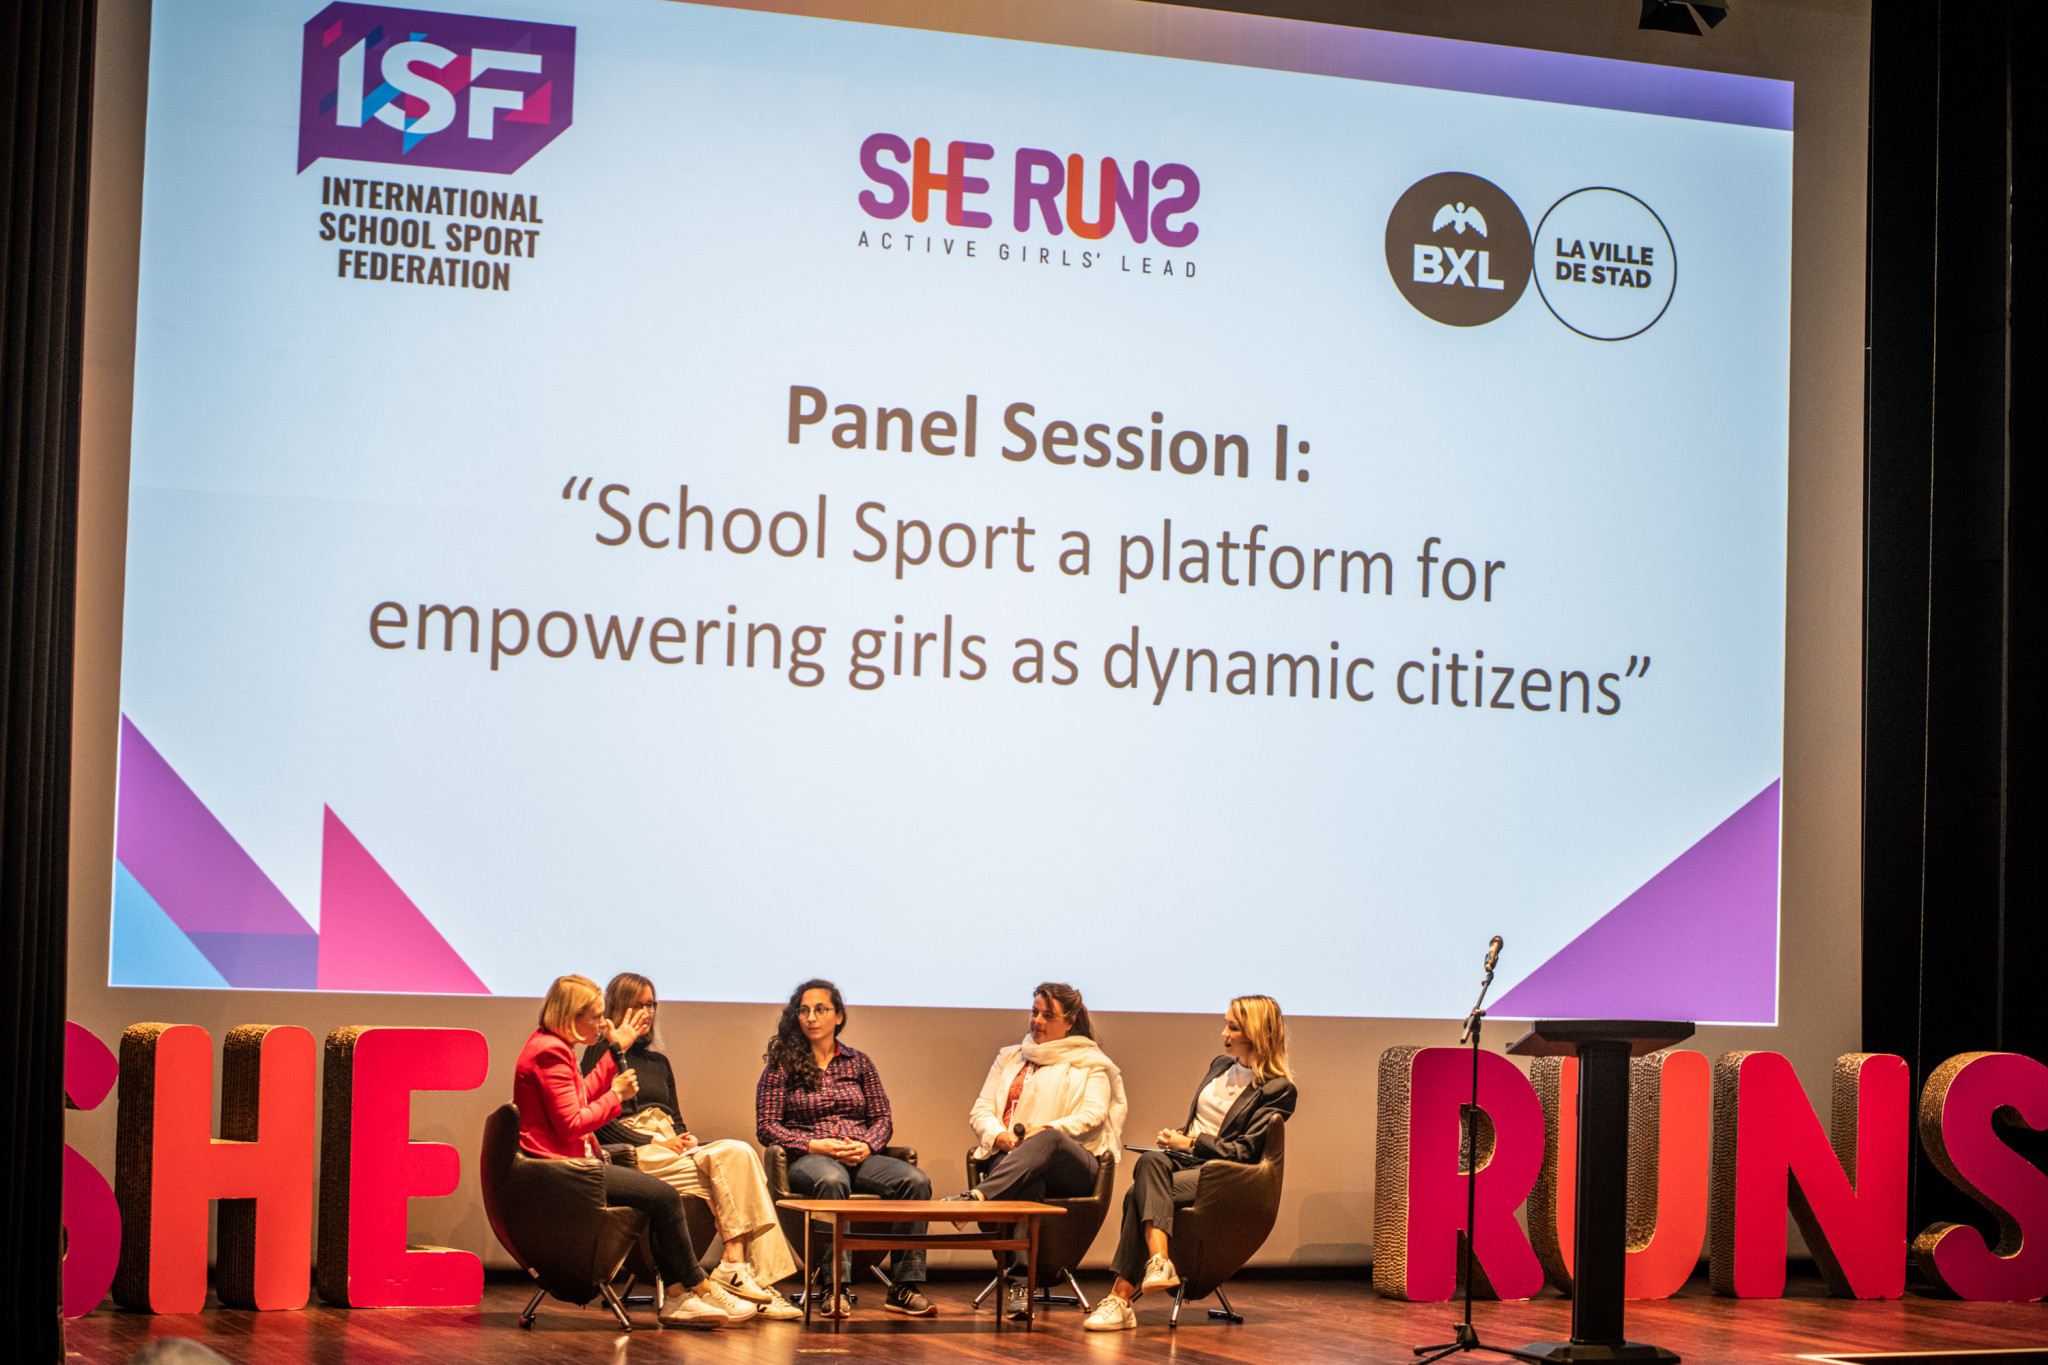 ISF highlights gender equality and sustainability at She Runs Active Girls' Lead event